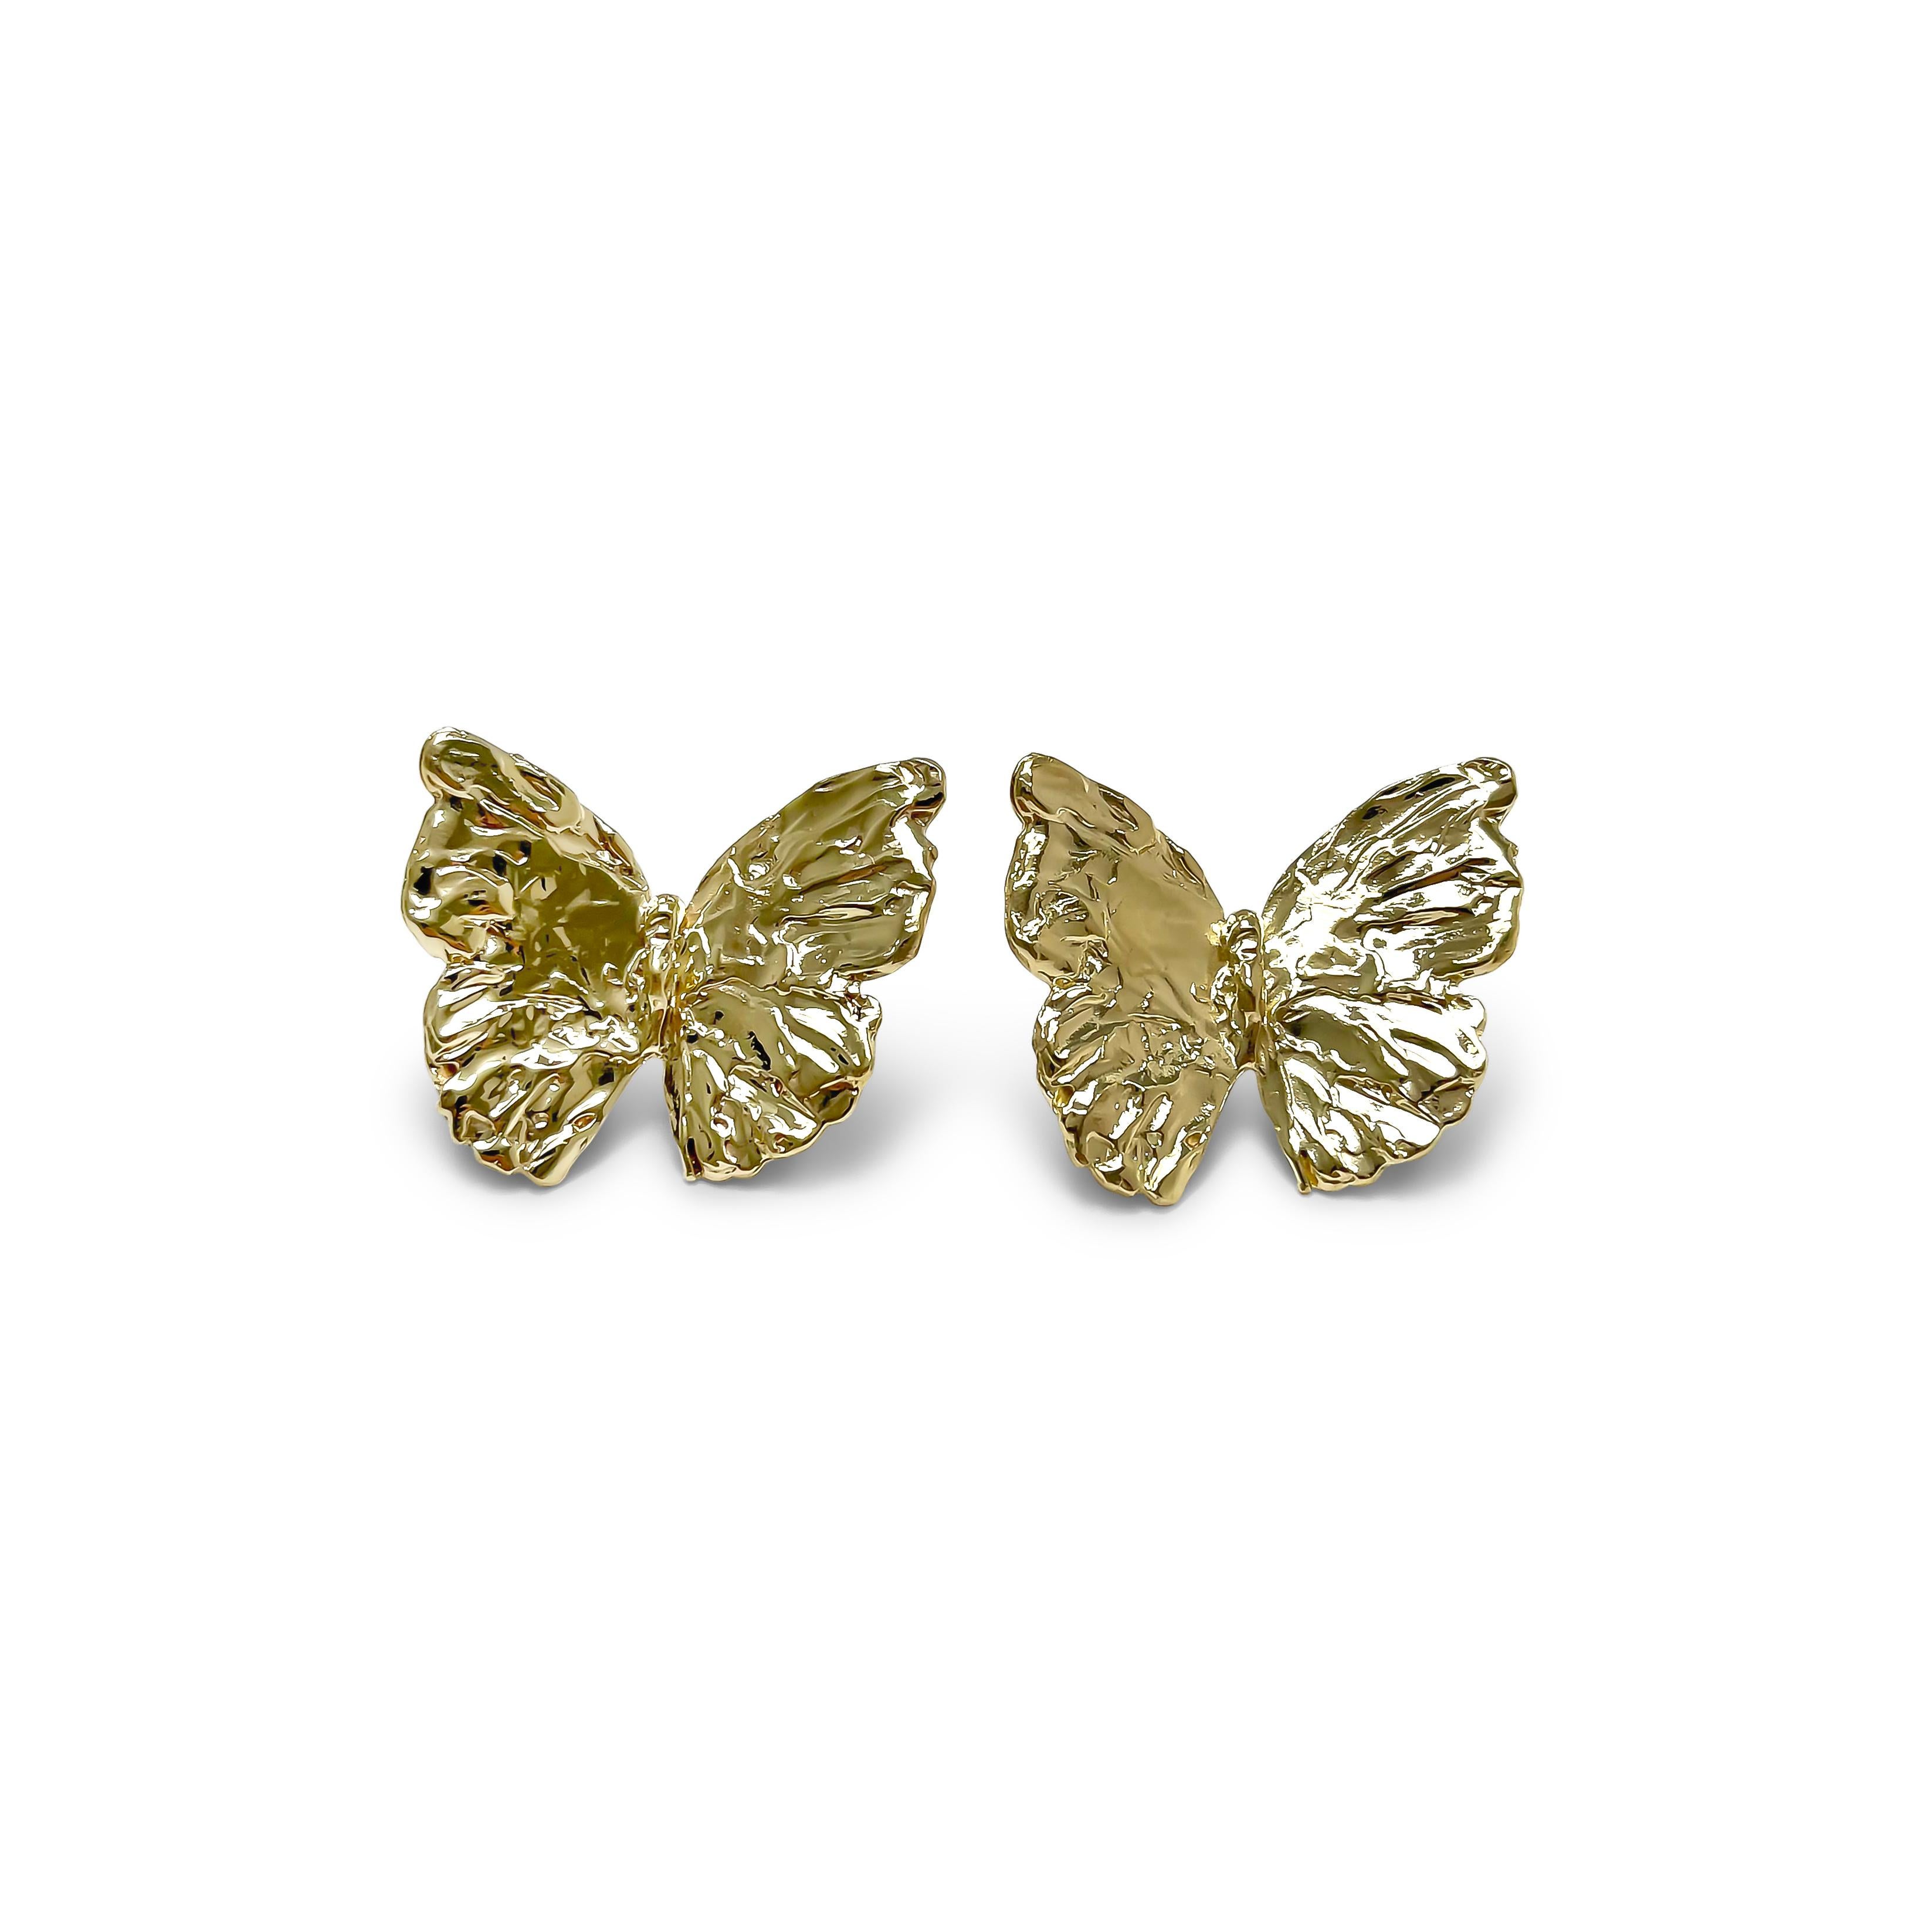 Intention: Attention to Detail

Design: These handcrafted earrings, part of our BELIEVE collection, which celebrates the powerful belief of the nascent butterfly, is an ode to texture. Gently framing the face, these hopeful charmers catch every